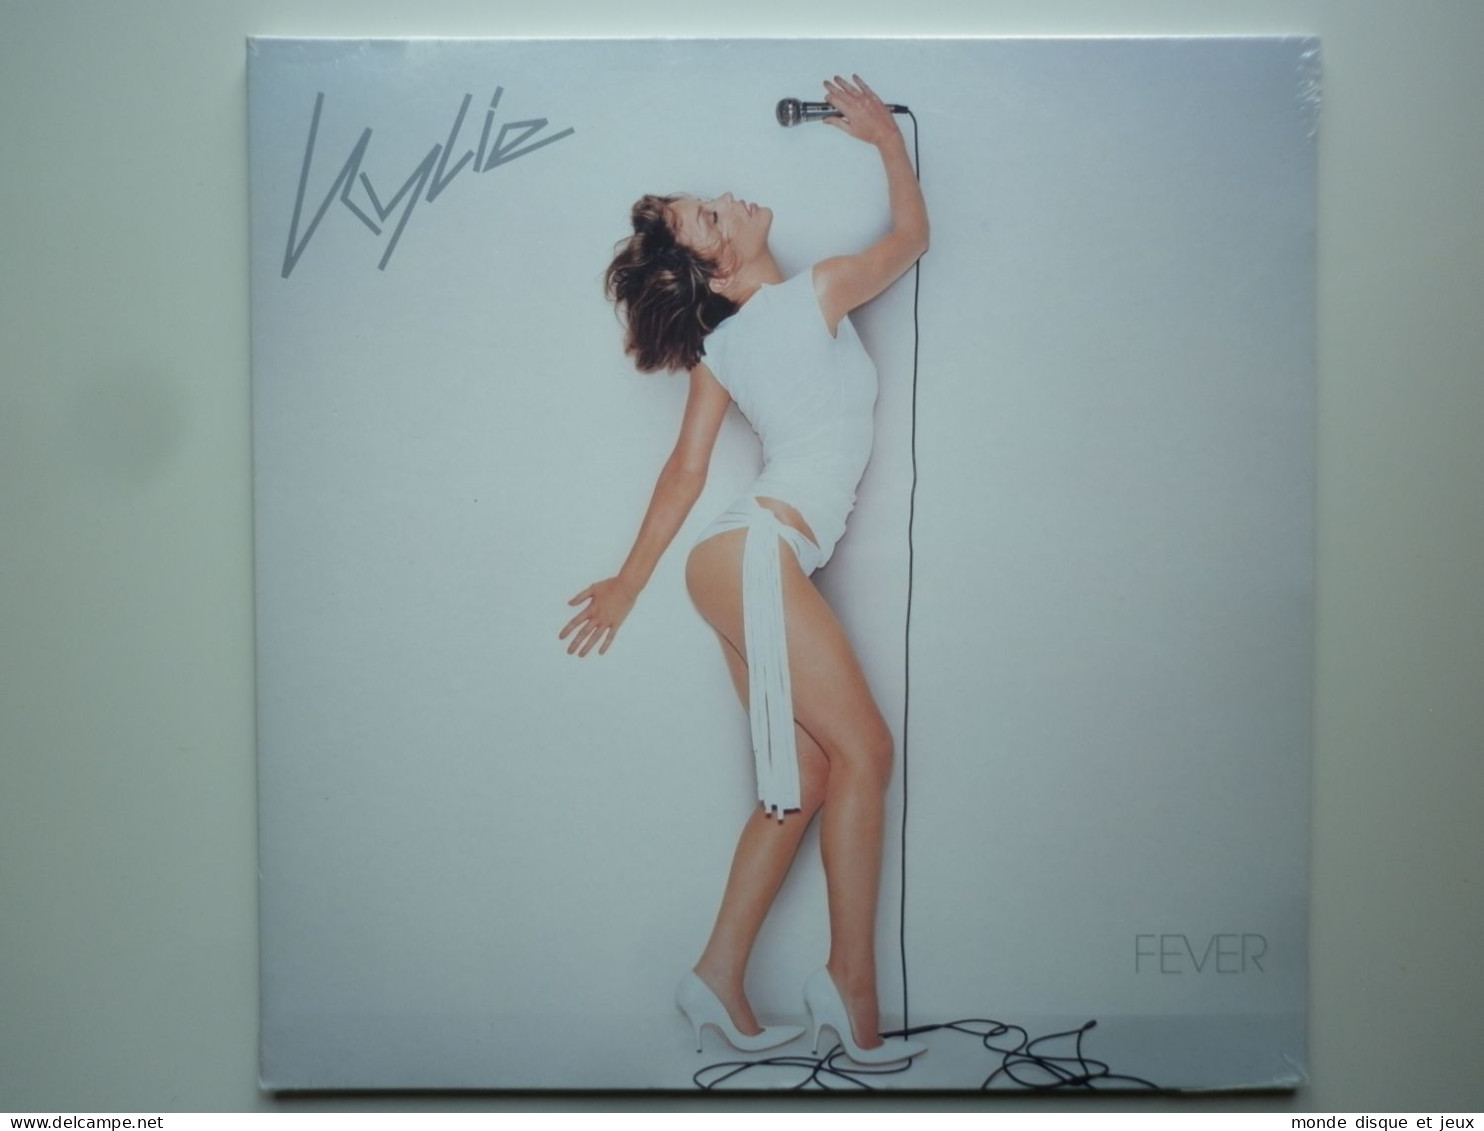 Kylie Minogue Album 33Tours Vinyle Fever - Other - French Music